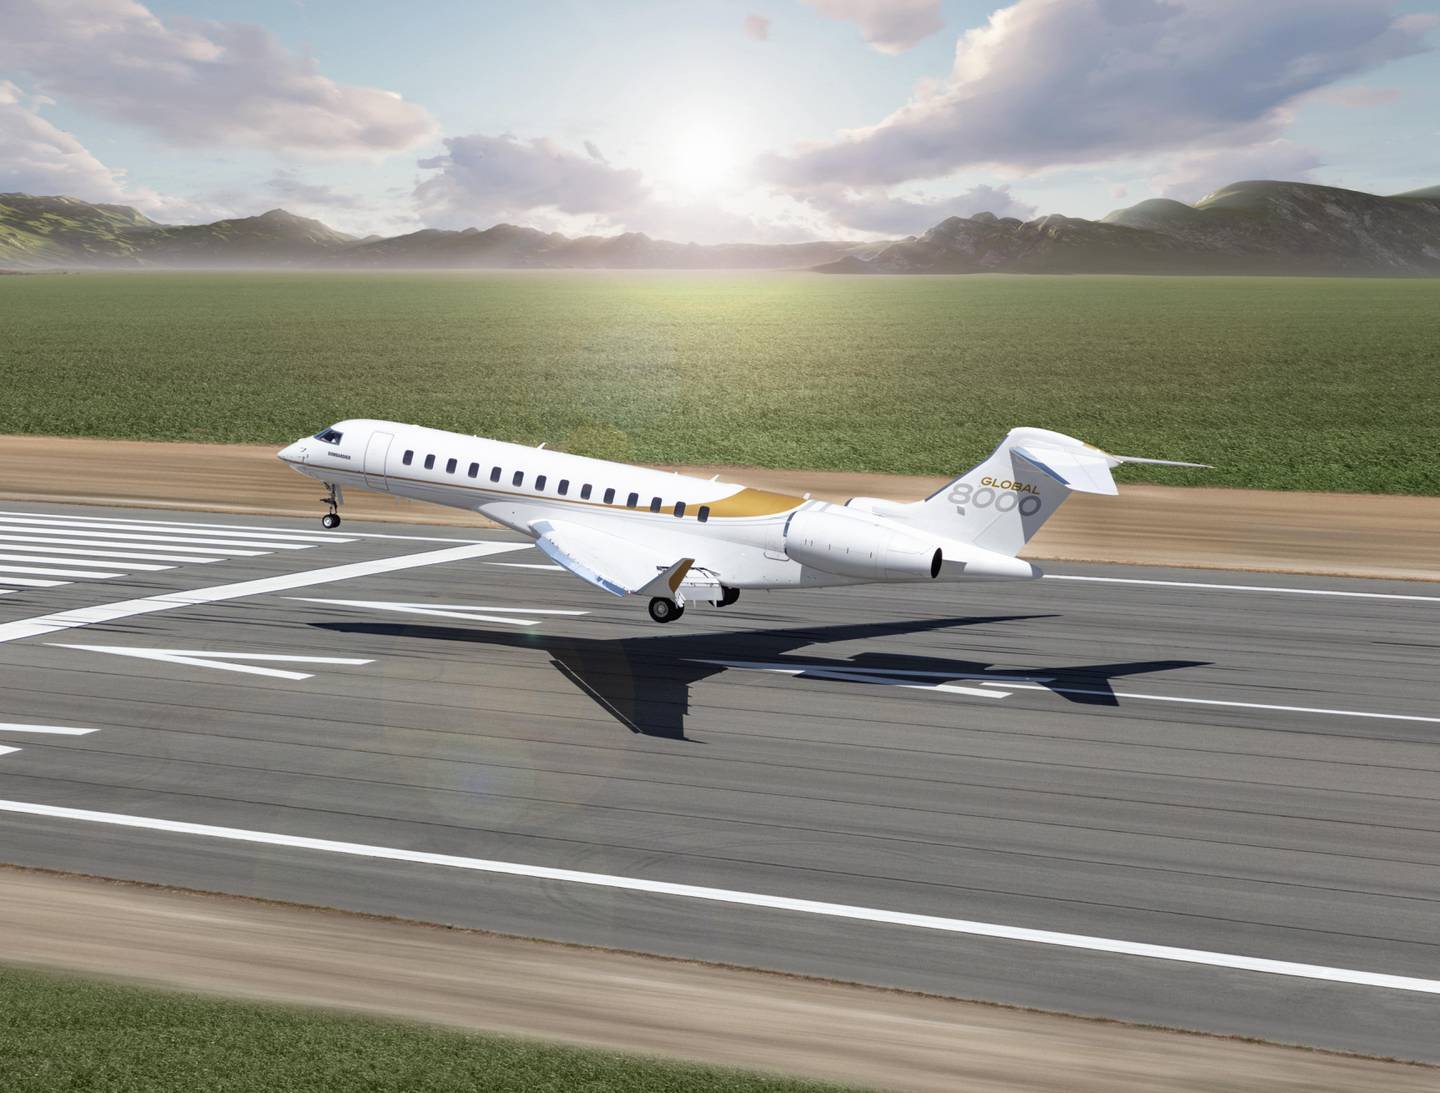 The world's fastest business jet has Smooth Flex wings for a comfortable flight in all weathers. Bombardier